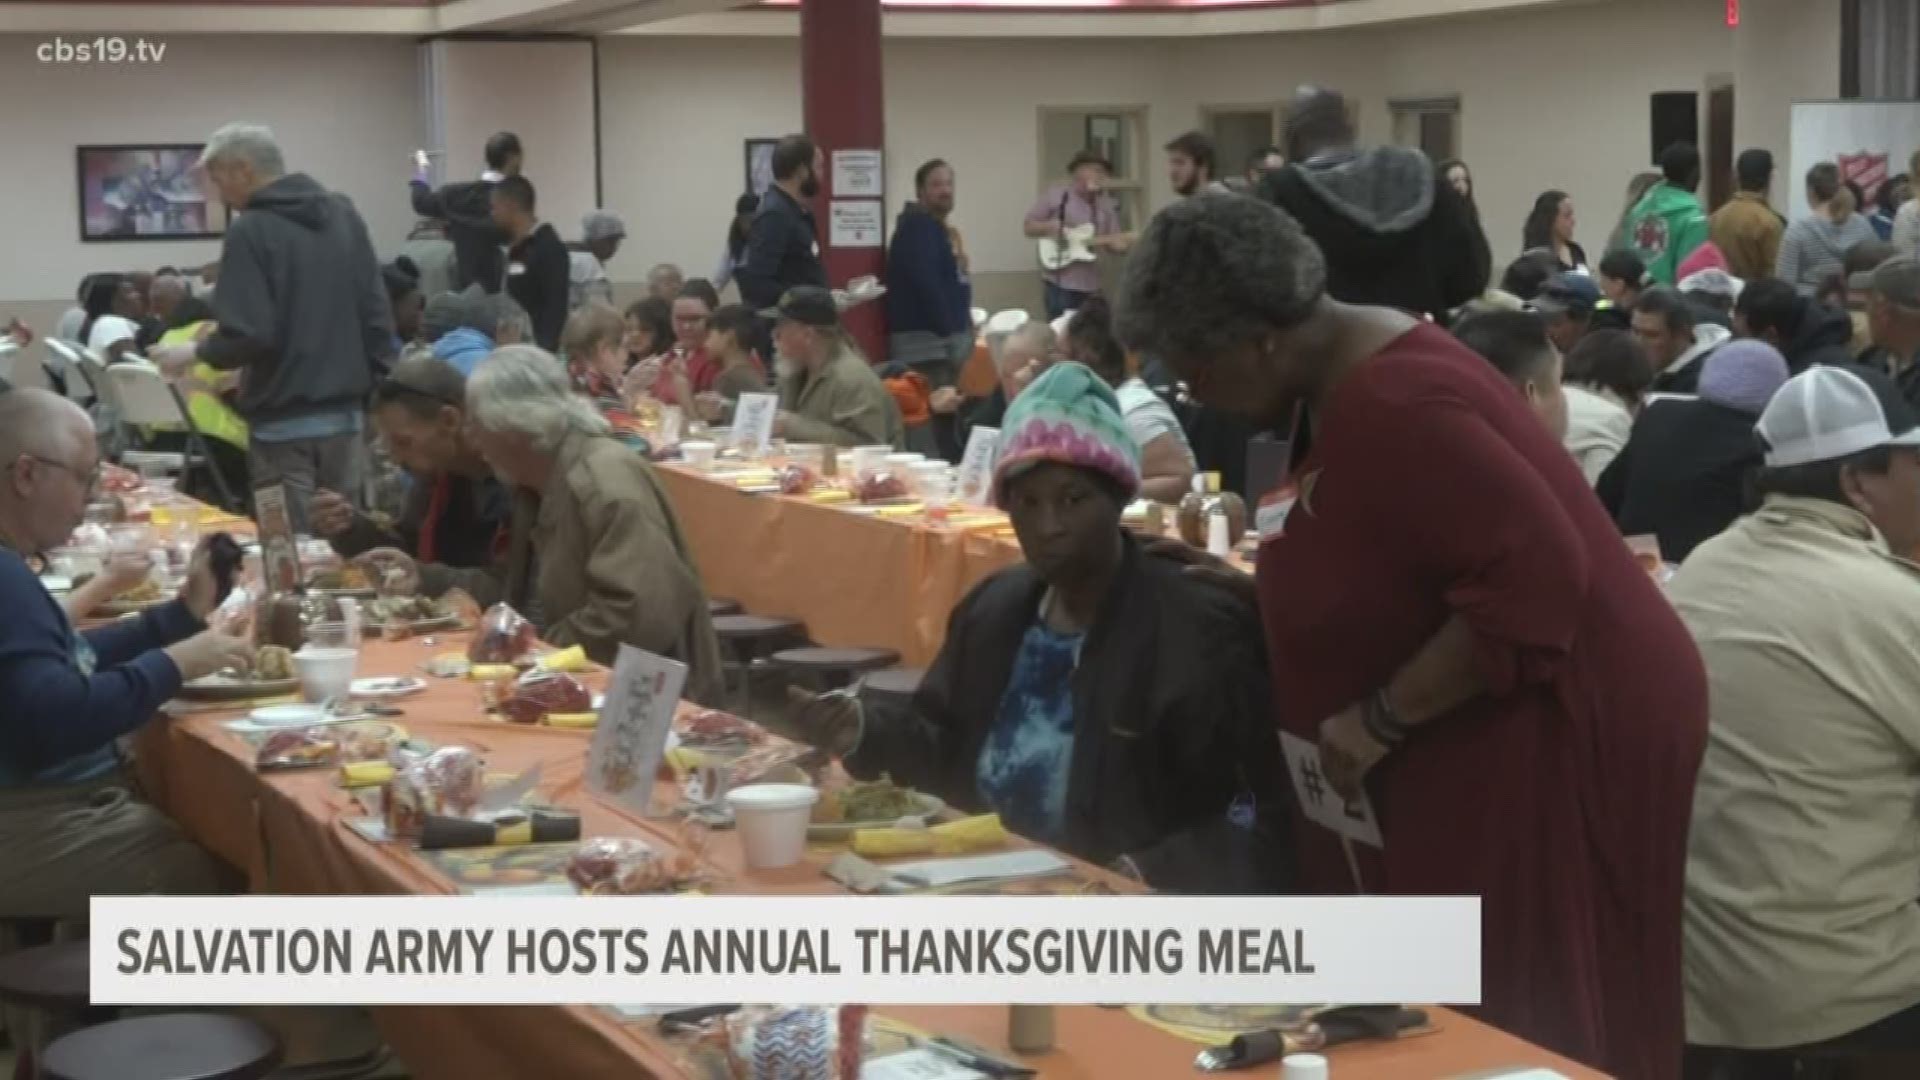 The organization prepared to serve about 1,500 people Thanksgiving Day this year.